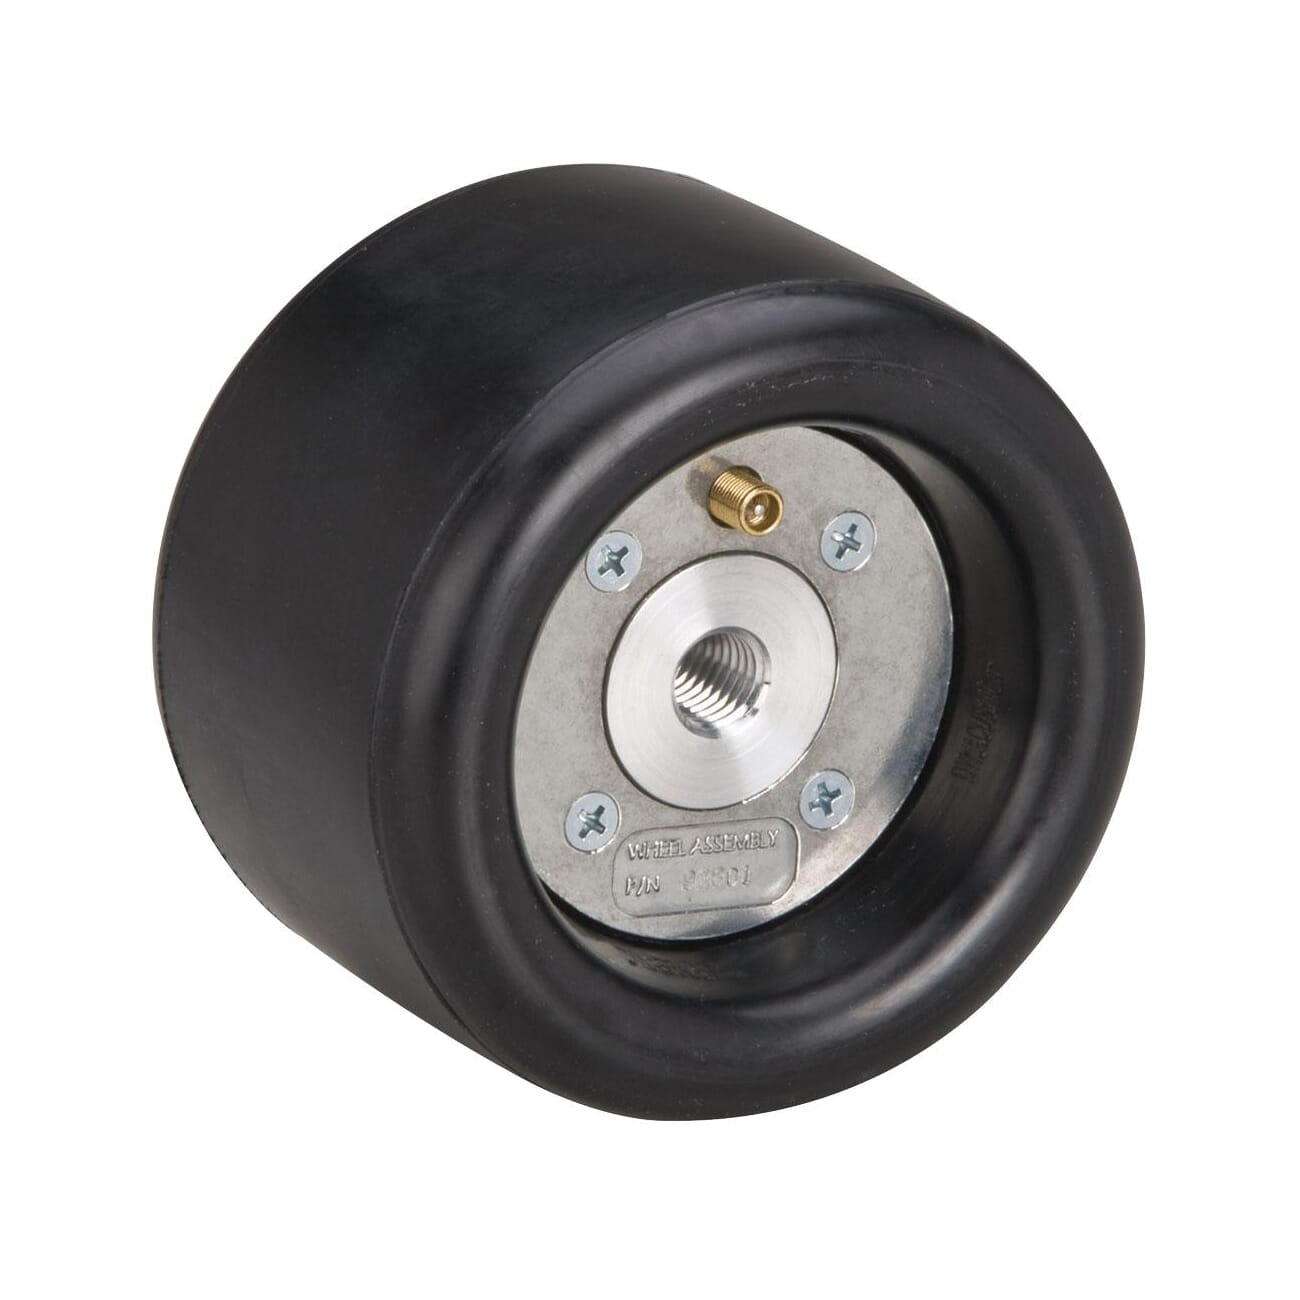 Dynabrade® Dynacushion® 92801 Standard Pneumatic Wheel, For Use With Dynastraight® 13521 Finishing Tool, 5 in Dia x 3-1/2 in W, 5/8-11 Female Spindle